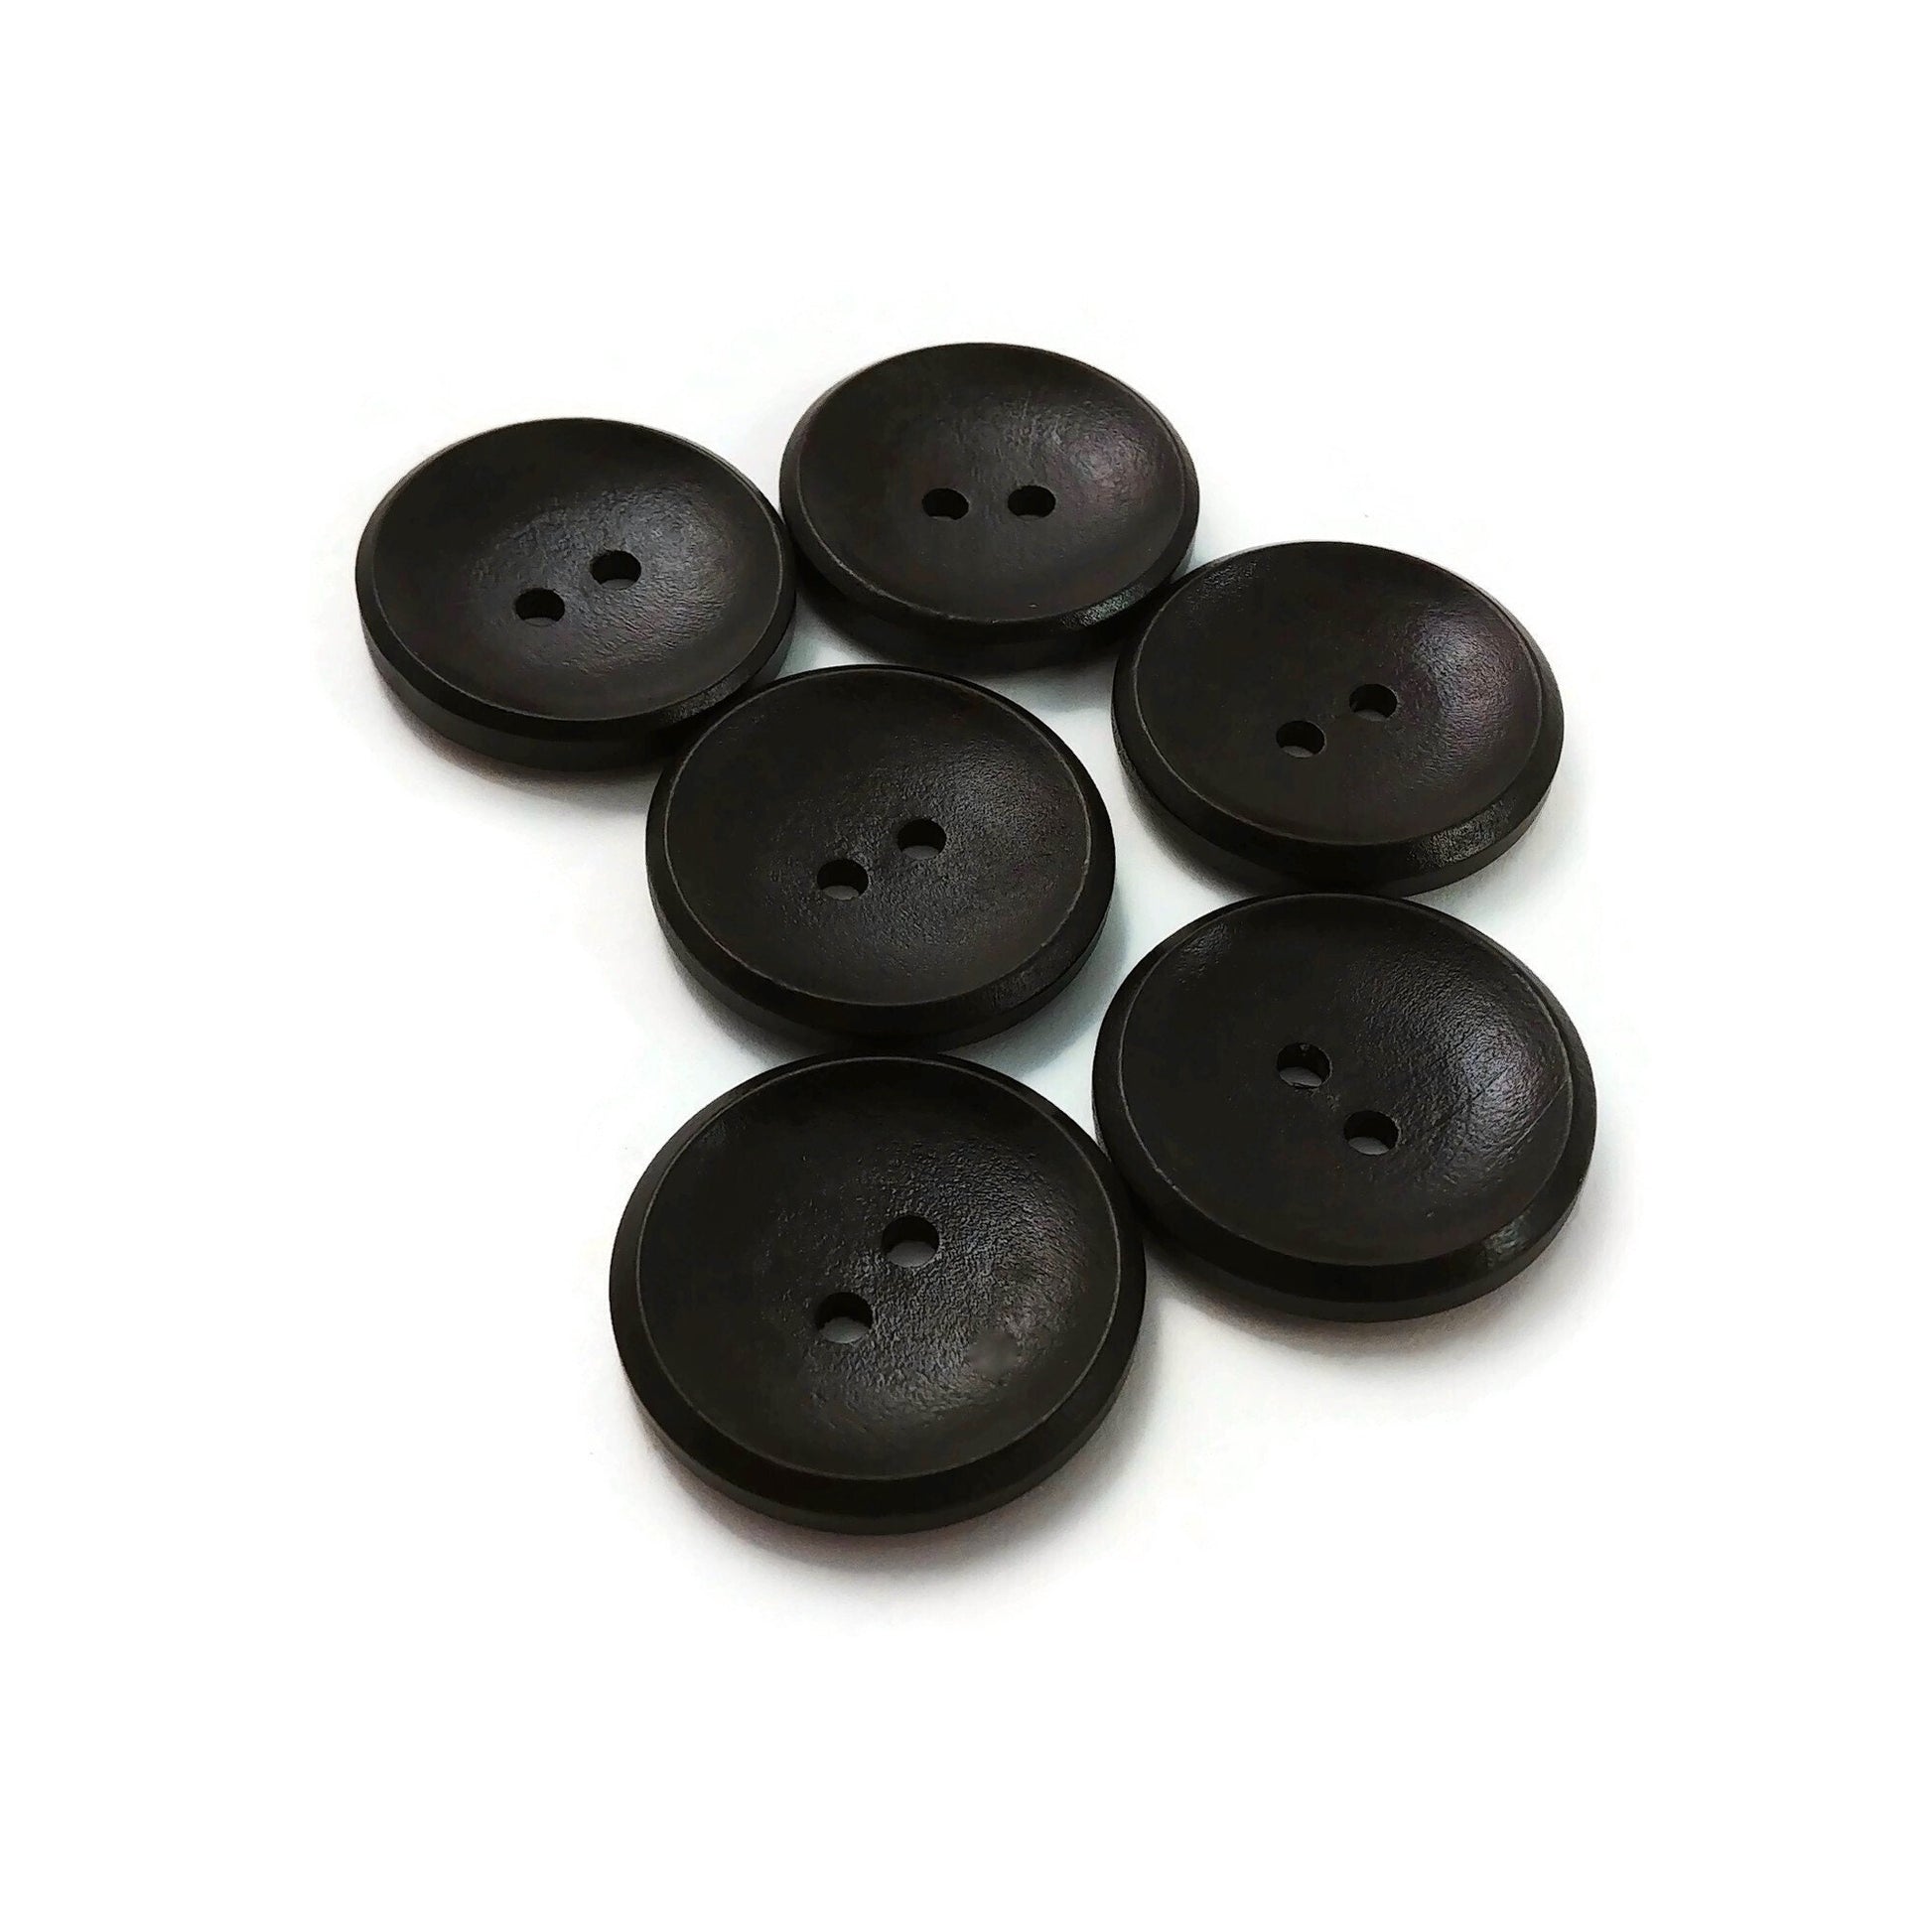 1 inch wooden buttons, 6 sewing buttons, 25mm natural wood button, Dark brown, brown, copper or natural